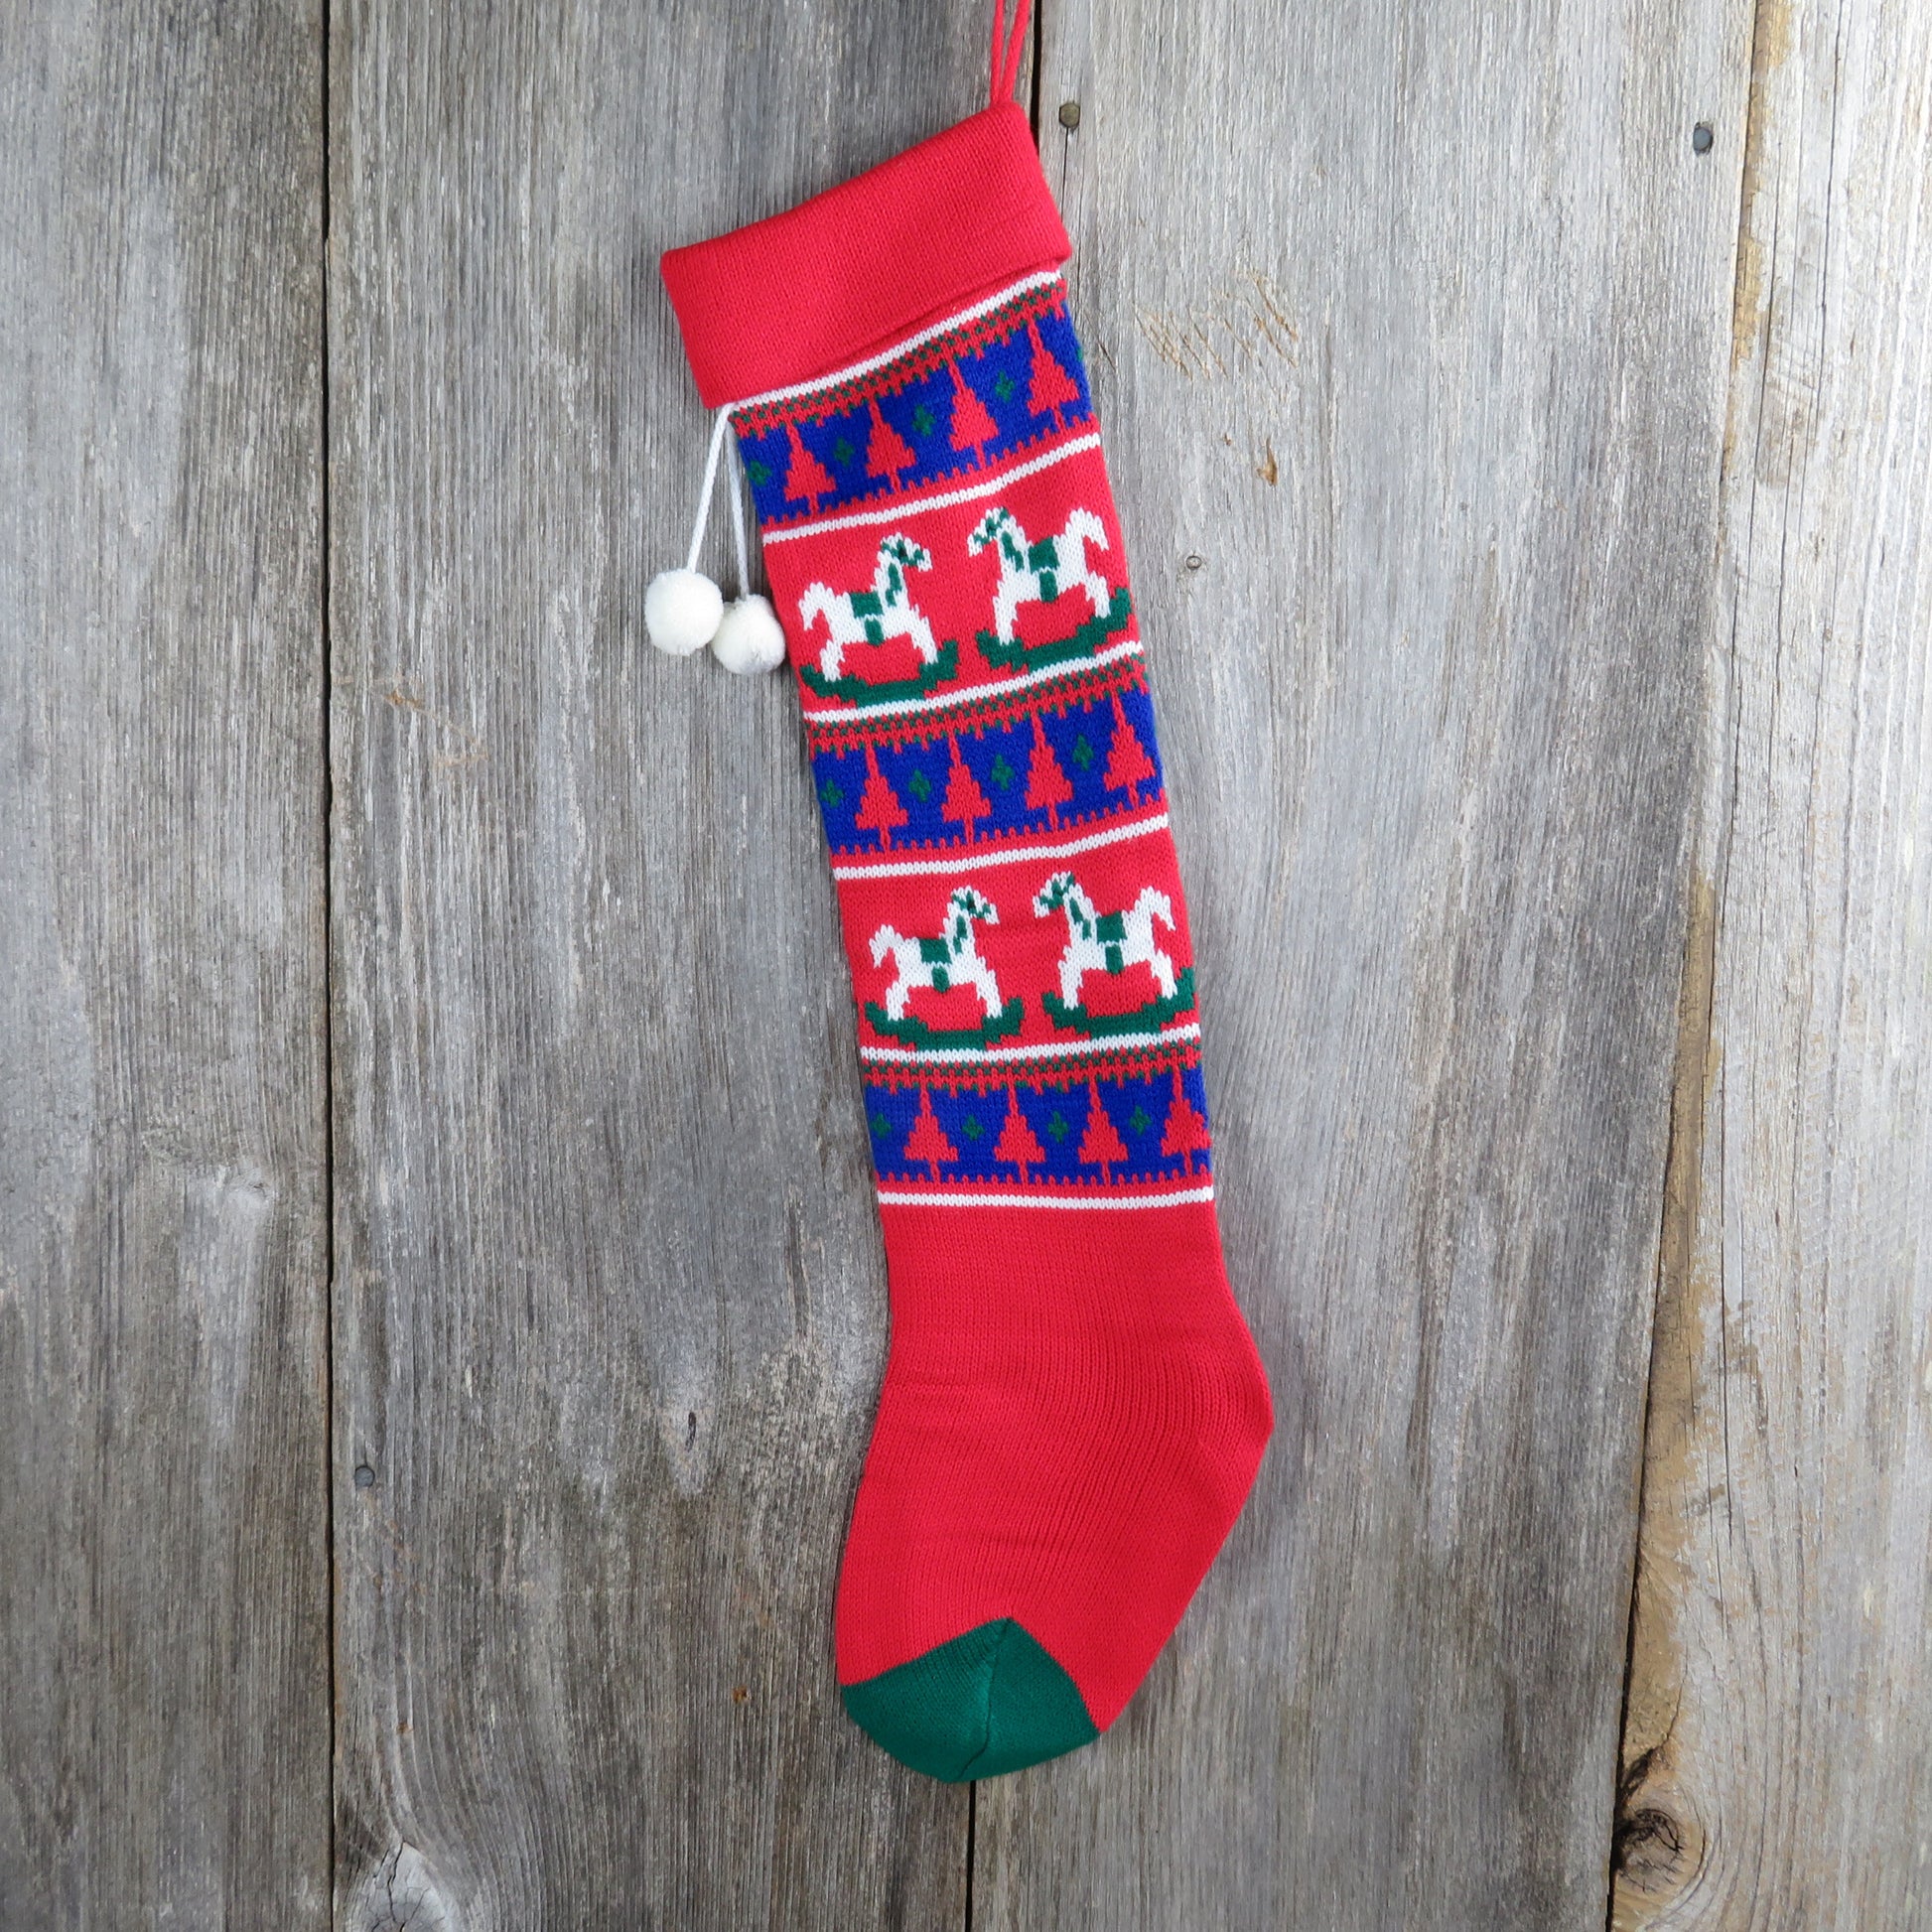 Vintage Rocking Horse Knit Stocking Christmas Knitted Red Blue White Holiday Home Decor - At Grandma's Table